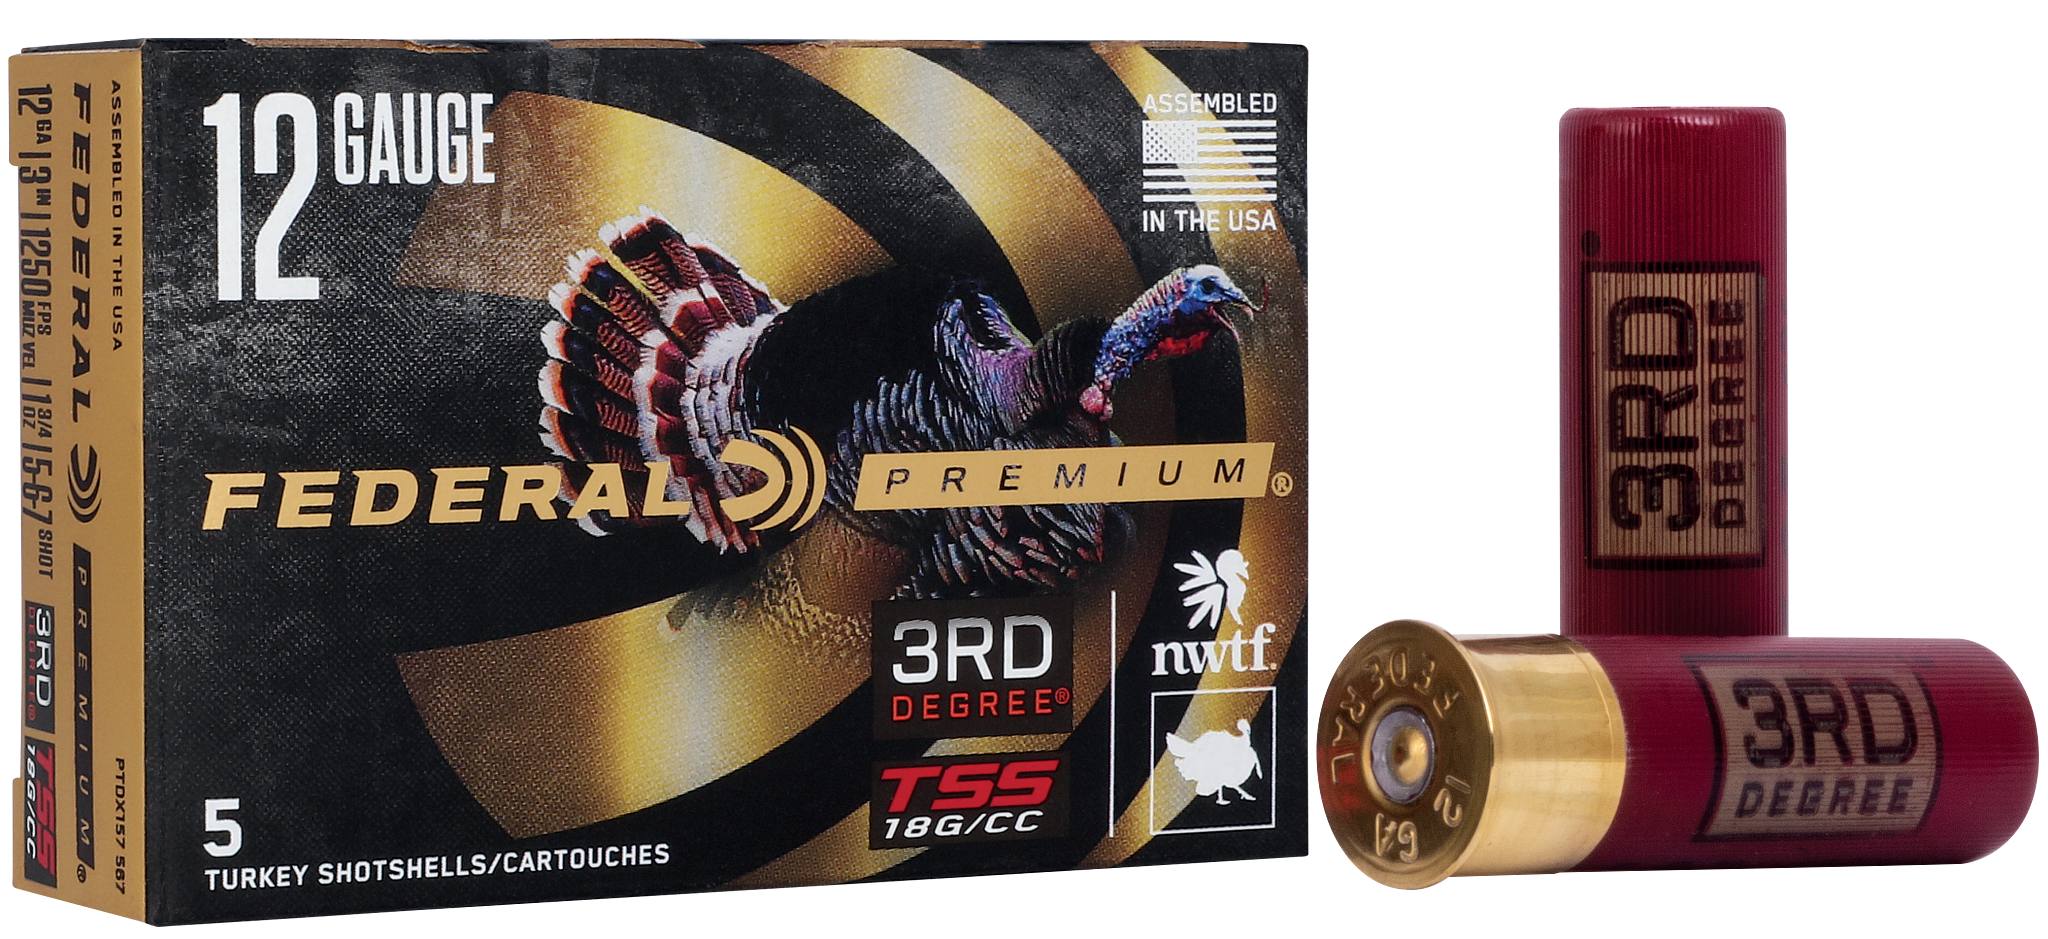 Buy 3rd Degree with HEAVYWEIGHT TSS for USD 35.99 | Federal Ammunition